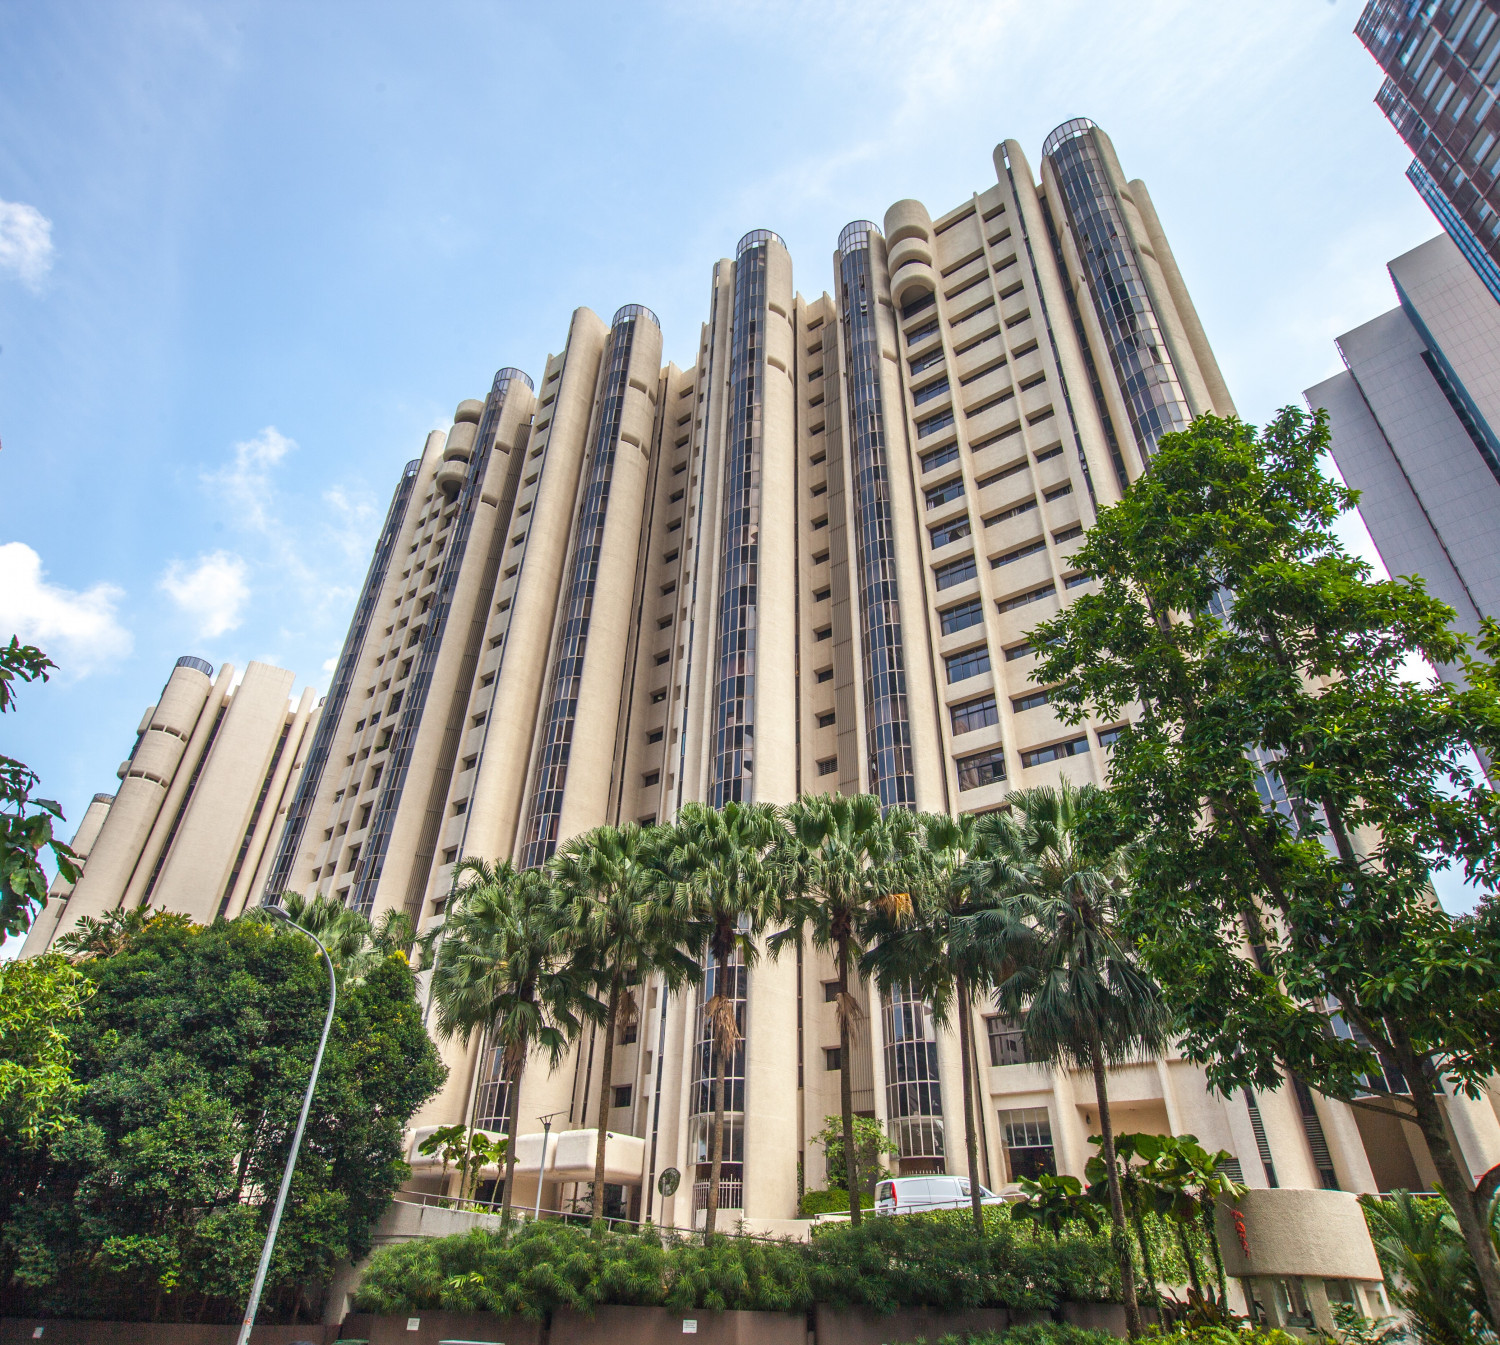 Horizon Towers relaunched at $1.1 bil in fifth collective sale bid - Property News